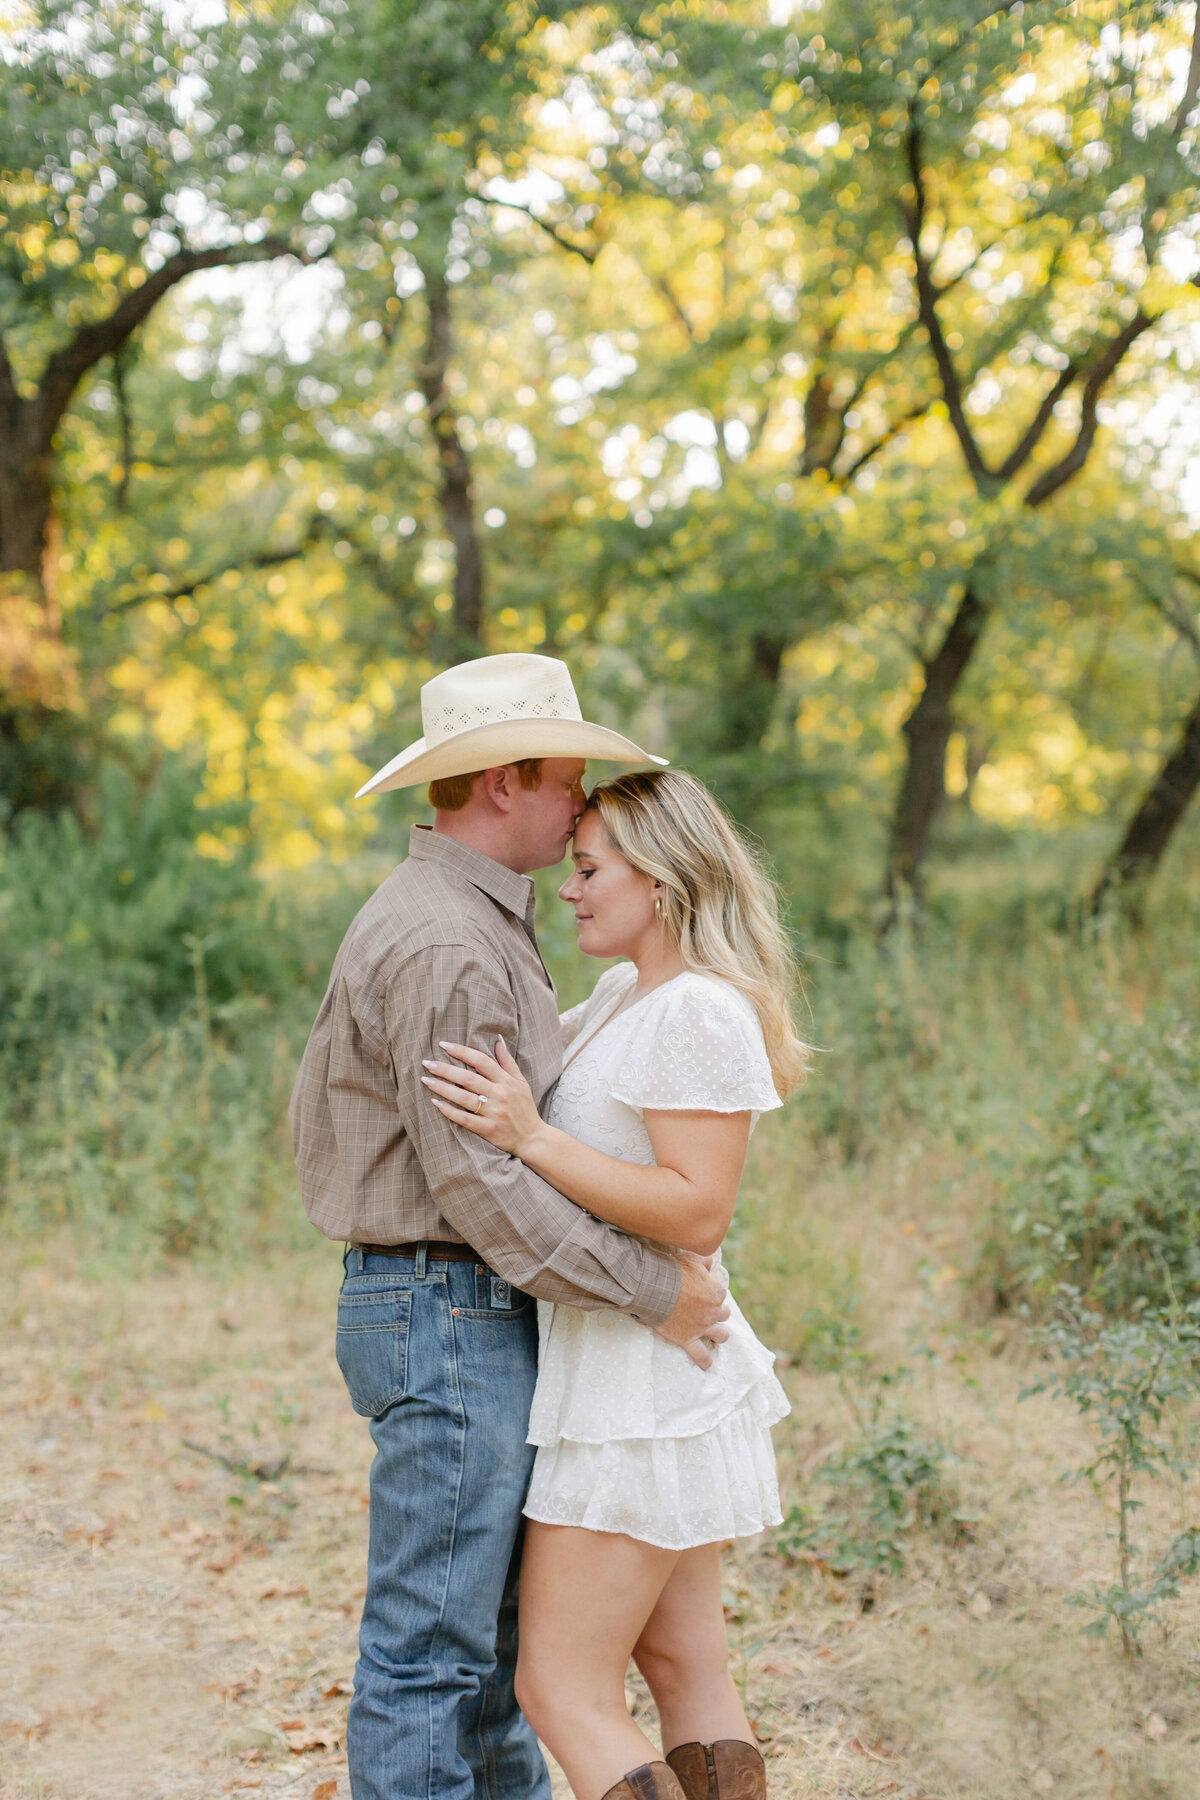 outdoor engagement session in dallas fort worth, texas